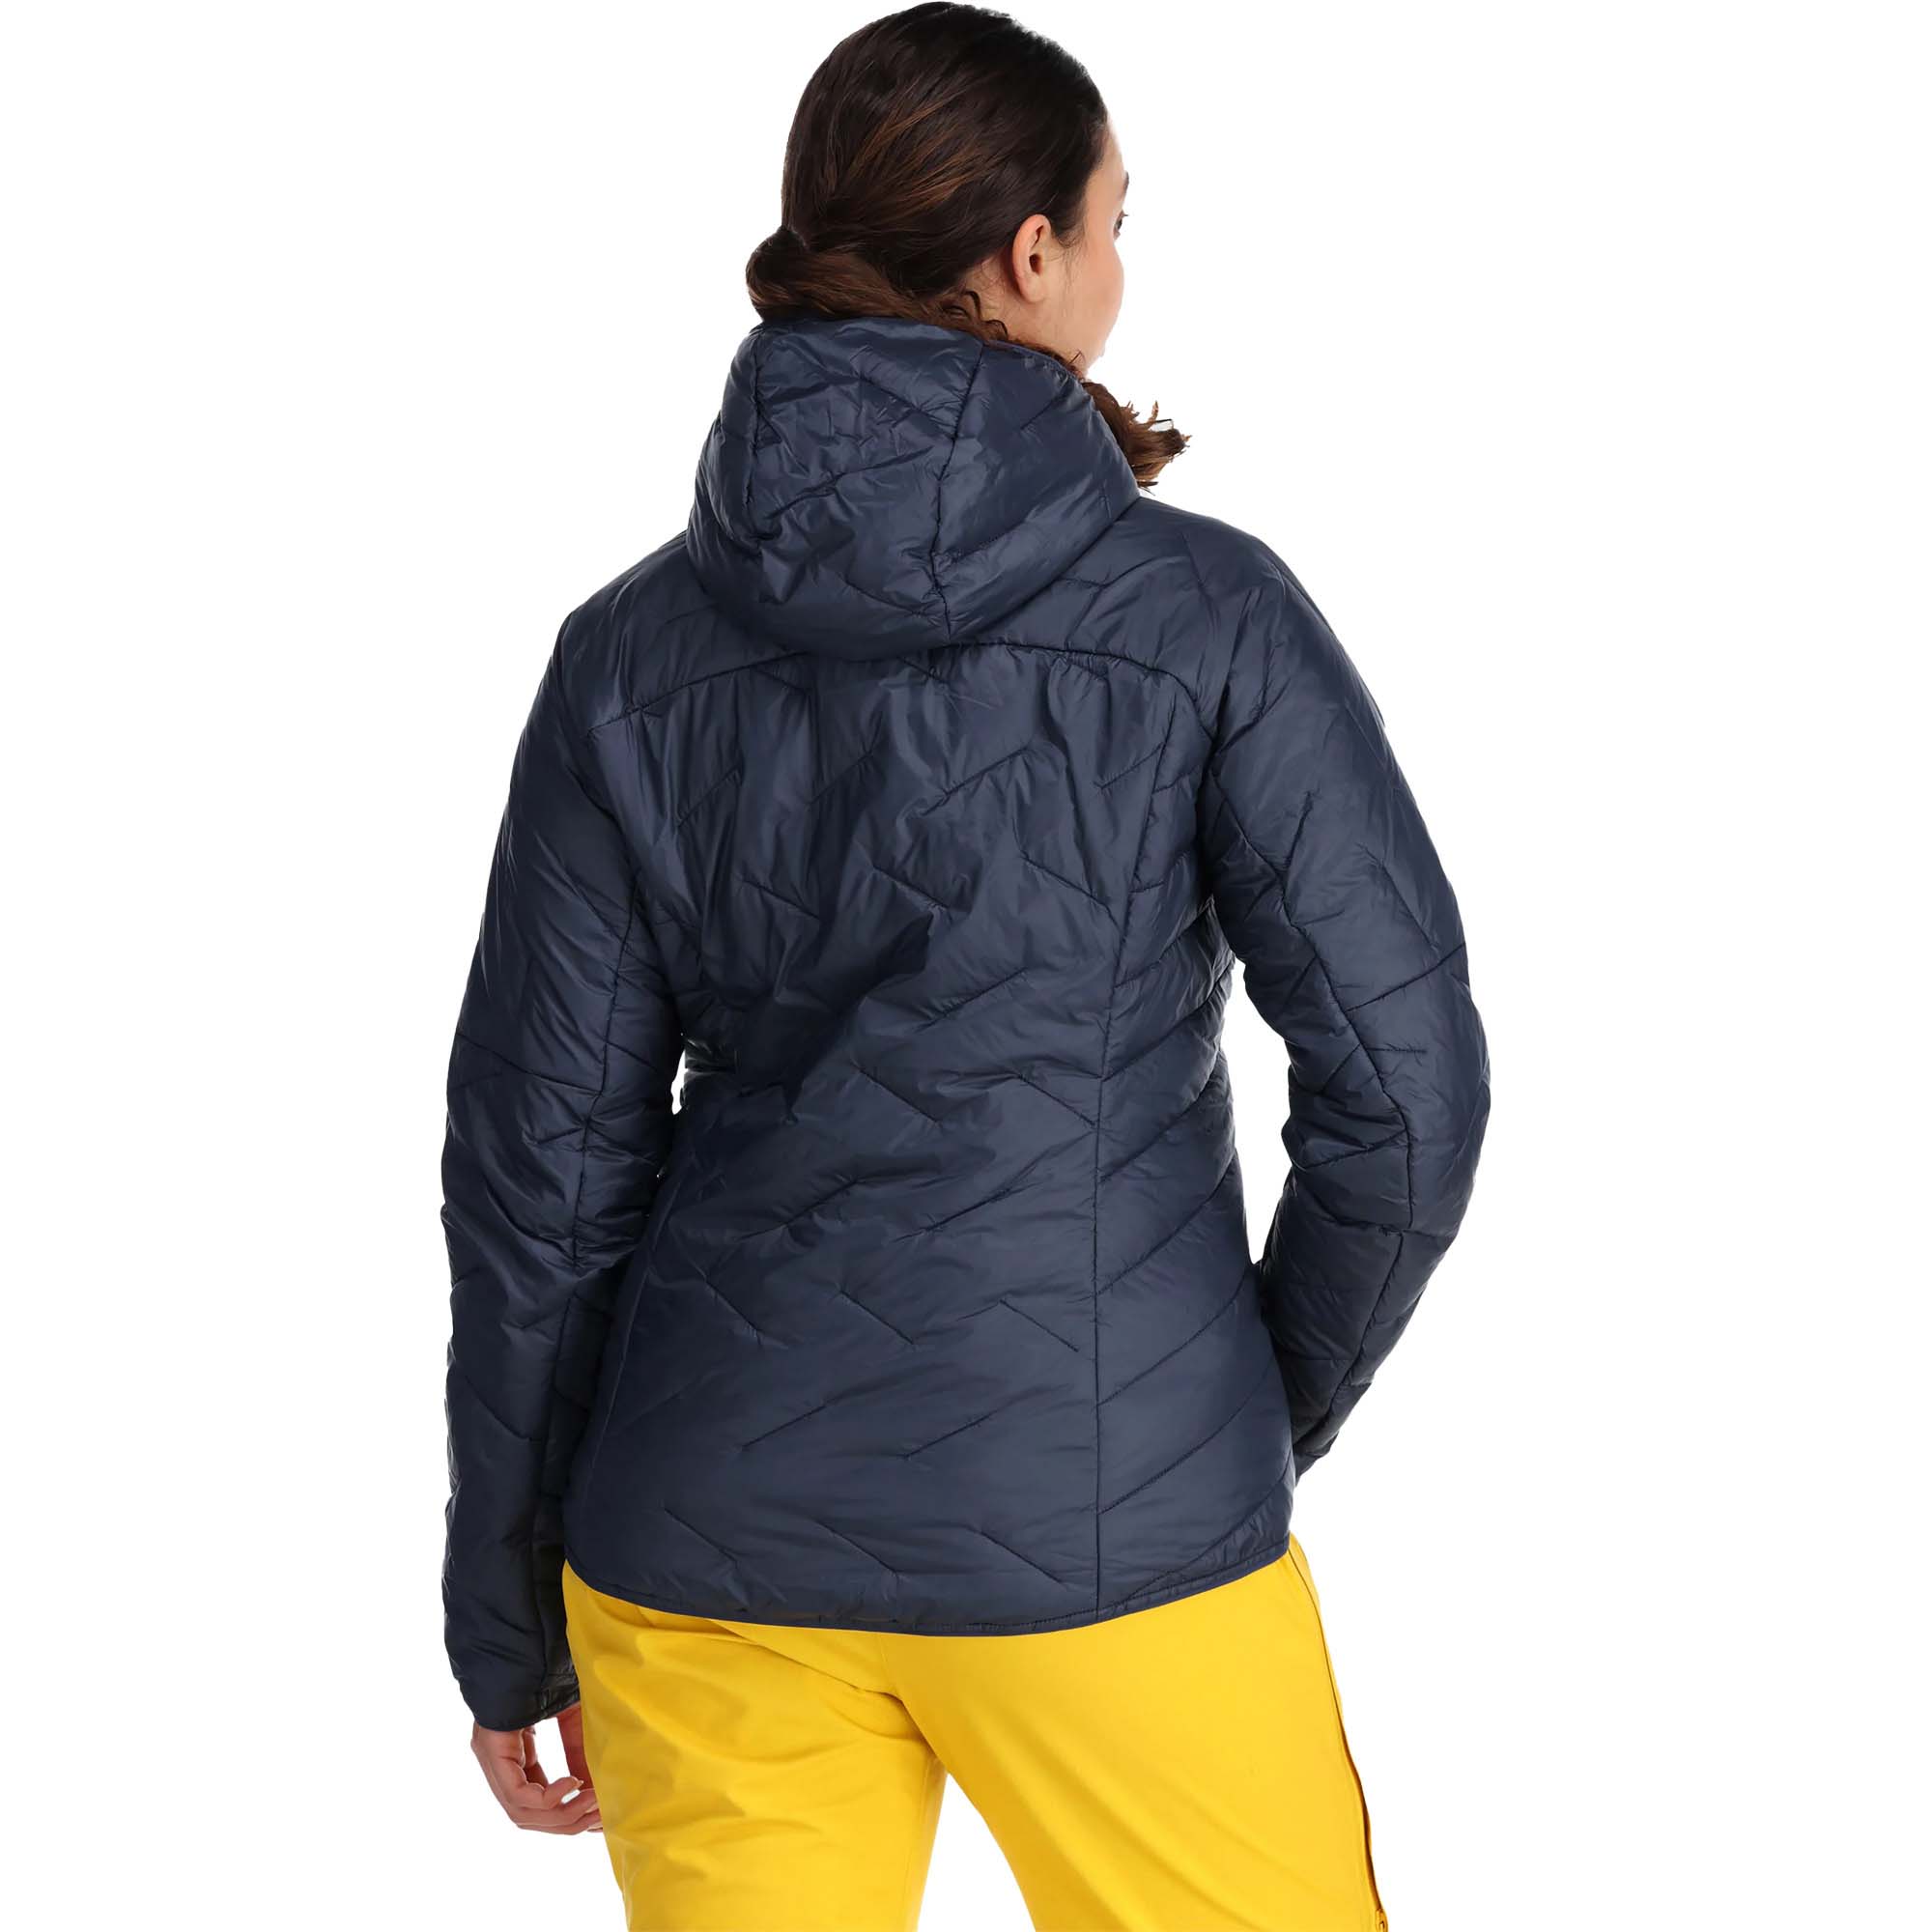 Outdoor Research SuperStrand LT Hoodie Women's Insulated Jacket